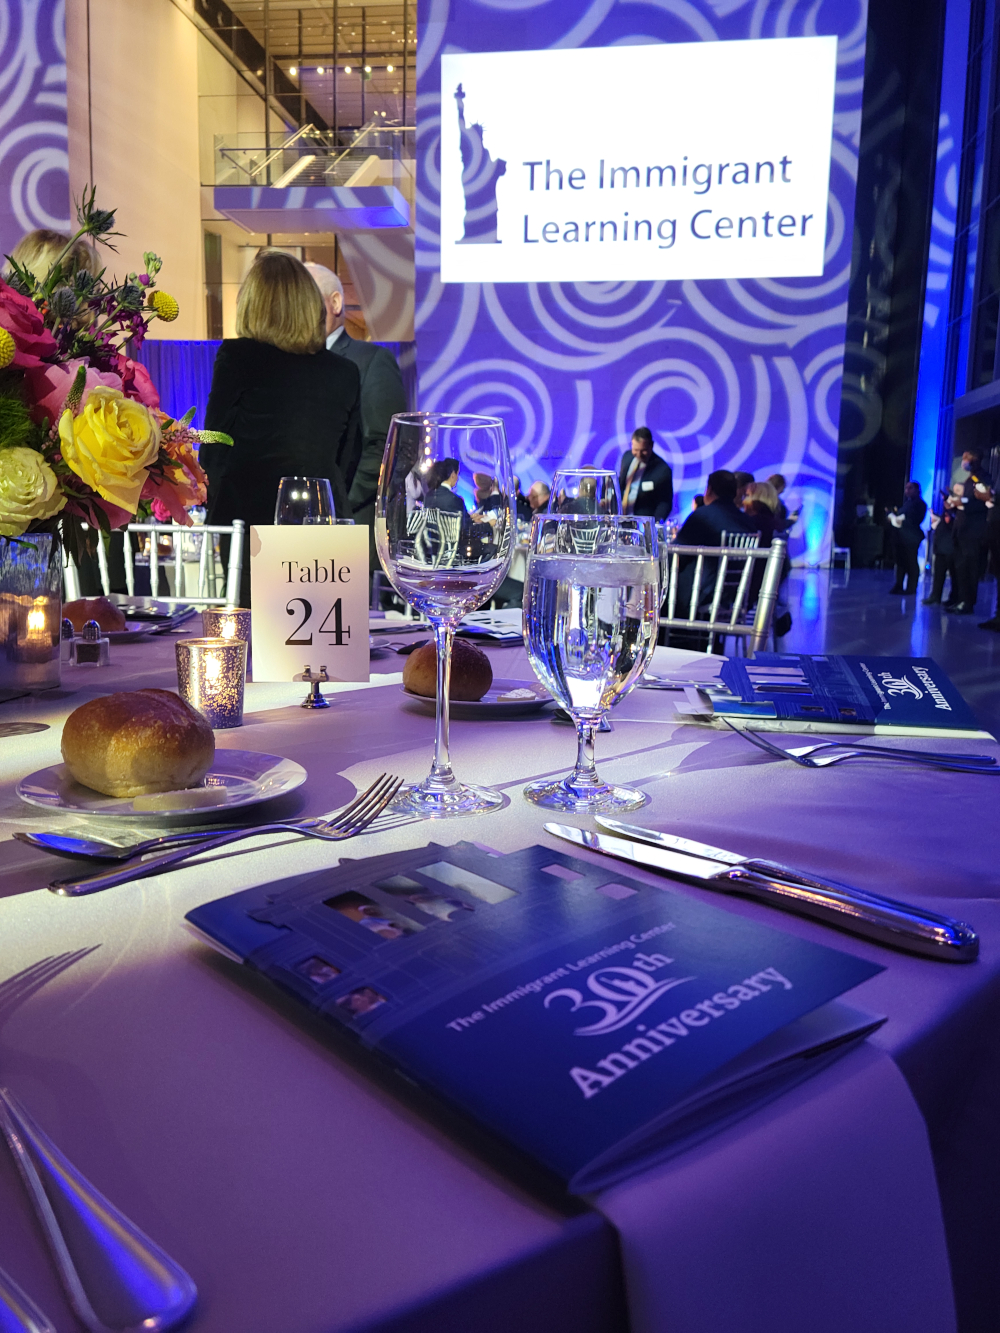 Photo from The Immigrant Learning Center's 30th Anniversary at the Museum of Fine Arts, showcasing the venue and program book.